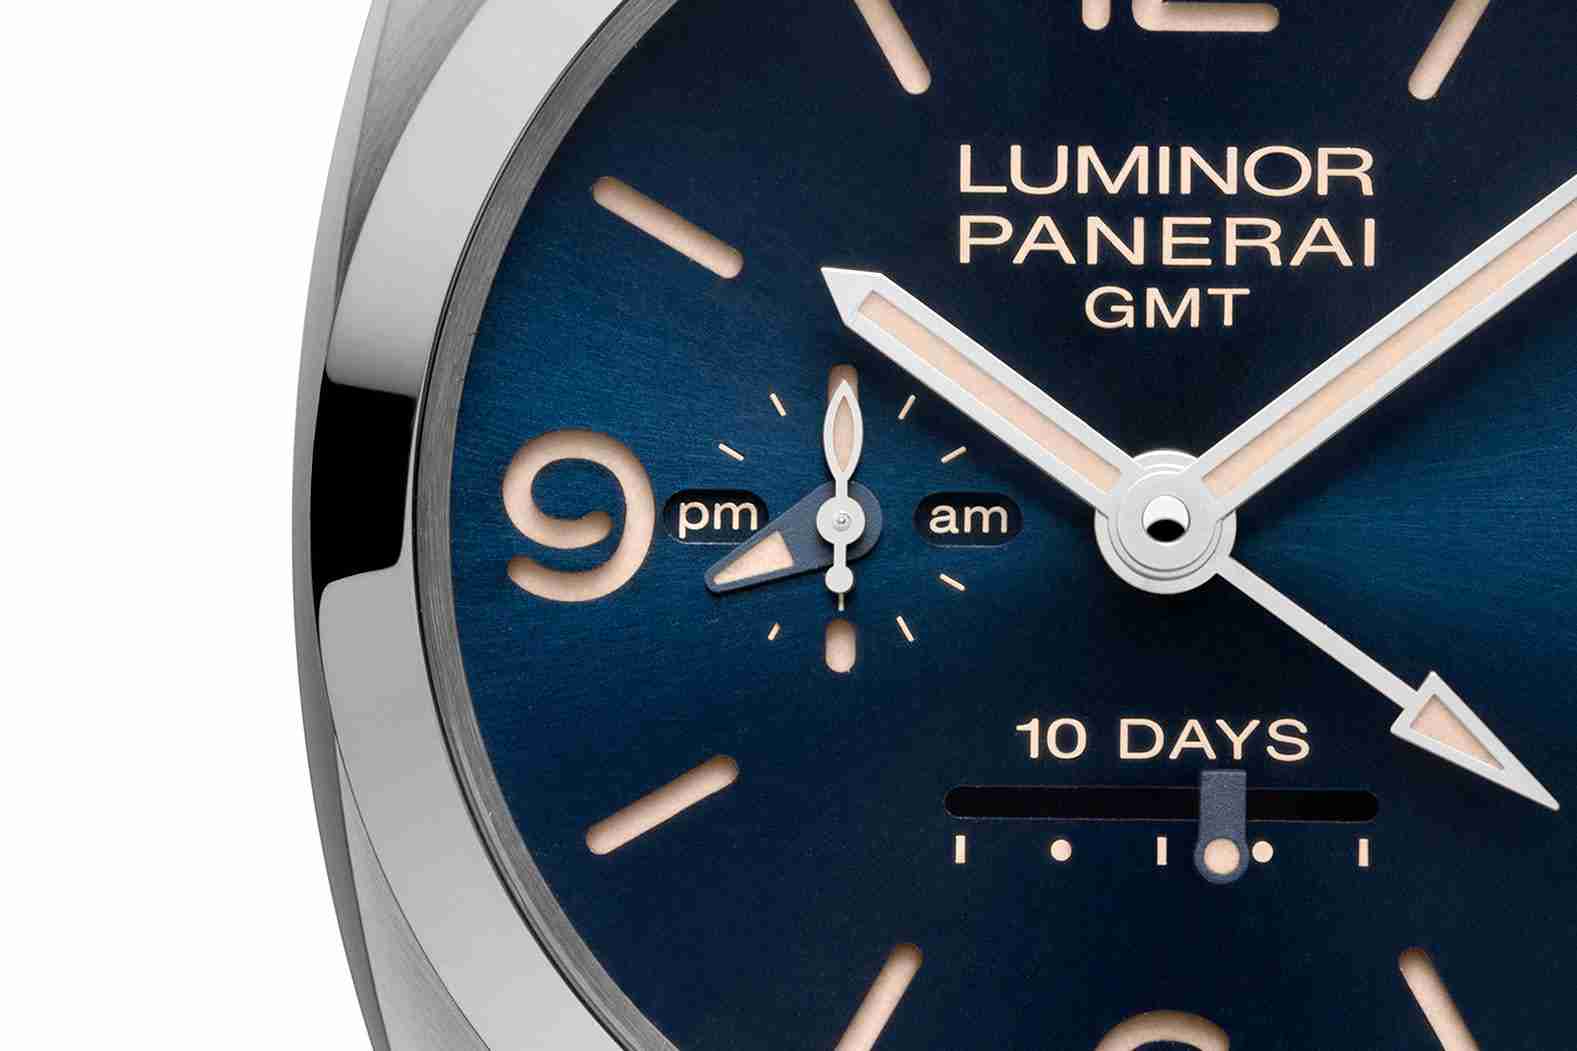 Replica Panerai Luminor 1950 10 Days GMT Automatic Acciaio Limited Edition 44mm Watch For 2018 Winter